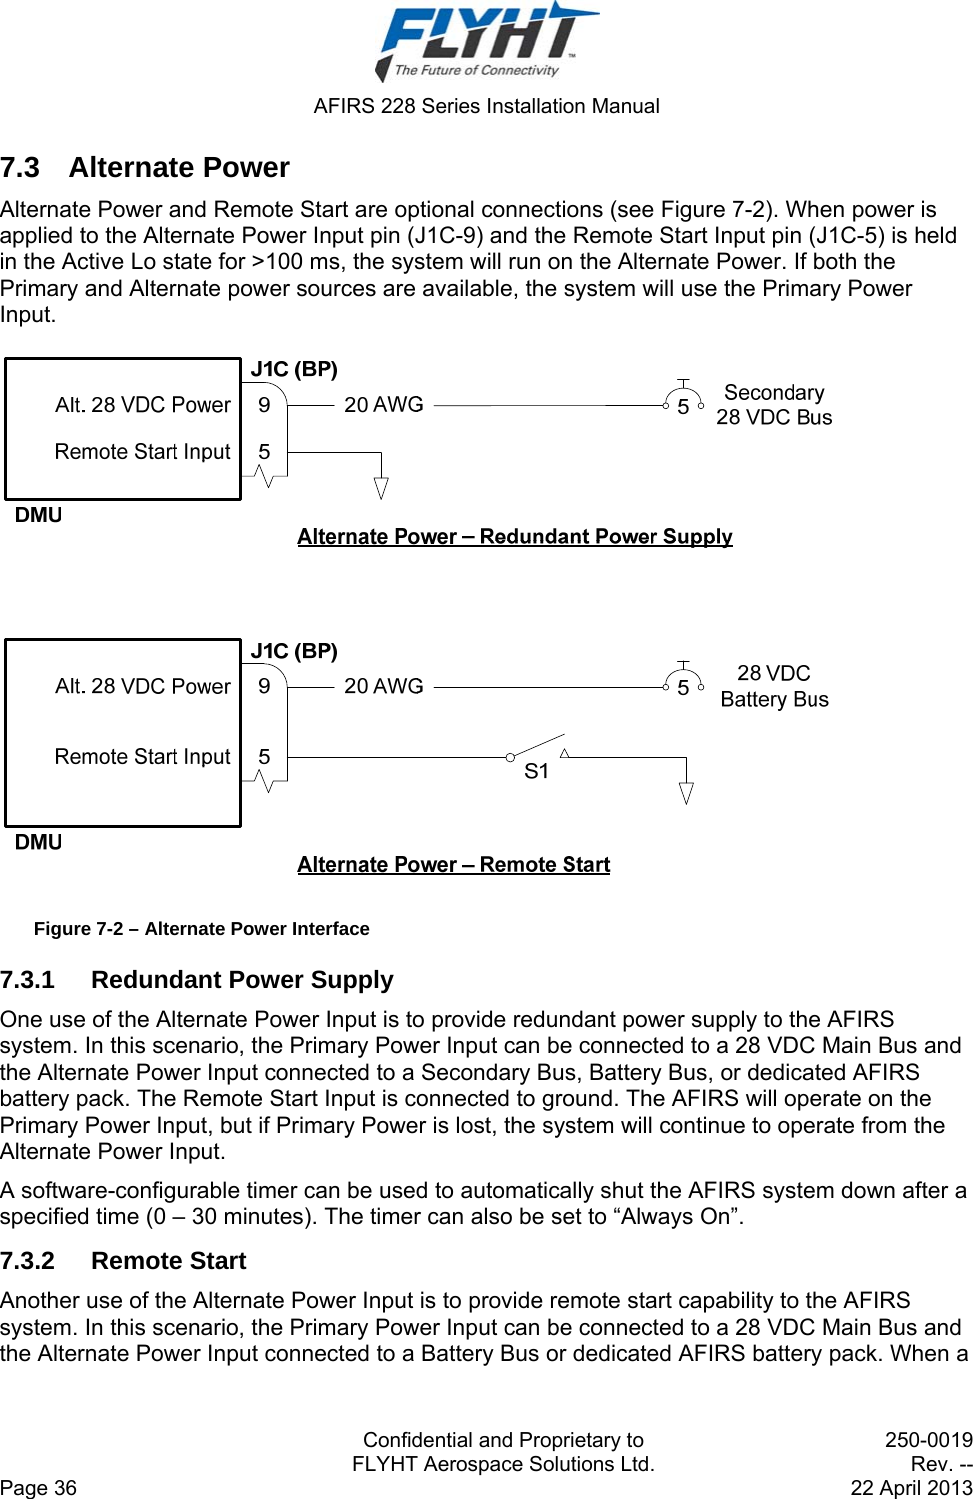  AFIRS 228 Series Installation Manual   Confidential and Proprietary to  250-0019   FLYHT Aerospace Solutions Ltd.  Rev. -- Page 36    22 April 2013 7.3 Alternate Power Alternate Power and Remote Start are optional connections (see Figure 7-2). When power is applied to the Alternate Power Input pin (J1C-9) and the Remote Start Input pin (J1C-5) is held in the Active Lo state for &gt;100 ms, the system will run on the Alternate Power. If both the Primary and Alternate power sources are available, the system will use the Primary Power Input.  Figure 7-2 – Alternate Power Interface 7.3.1  Redundant Power Supply One use of the Alternate Power Input is to provide redundant power supply to the AFIRS system. In this scenario, the Primary Power Input can be connected to a 28 VDC Main Bus and the Alternate Power Input connected to a Secondary Bus, Battery Bus, or dedicated AFIRS battery pack. The Remote Start Input is connected to ground. The AFIRS will operate on the Primary Power Input, but if Primary Power is lost, the system will continue to operate from the Alternate Power Input. A software-configurable timer can be used to automatically shut the AFIRS system down after a specified time (0 – 30 minutes). The timer can also be set to “Always On”. 7.3.2 Remote Start Another use of the Alternate Power Input is to provide remote start capability to the AFIRS system. In this scenario, the Primary Power Input can be connected to a 28 VDC Main Bus and the Alternate Power Input connected to a Battery Bus or dedicated AFIRS battery pack. When a 